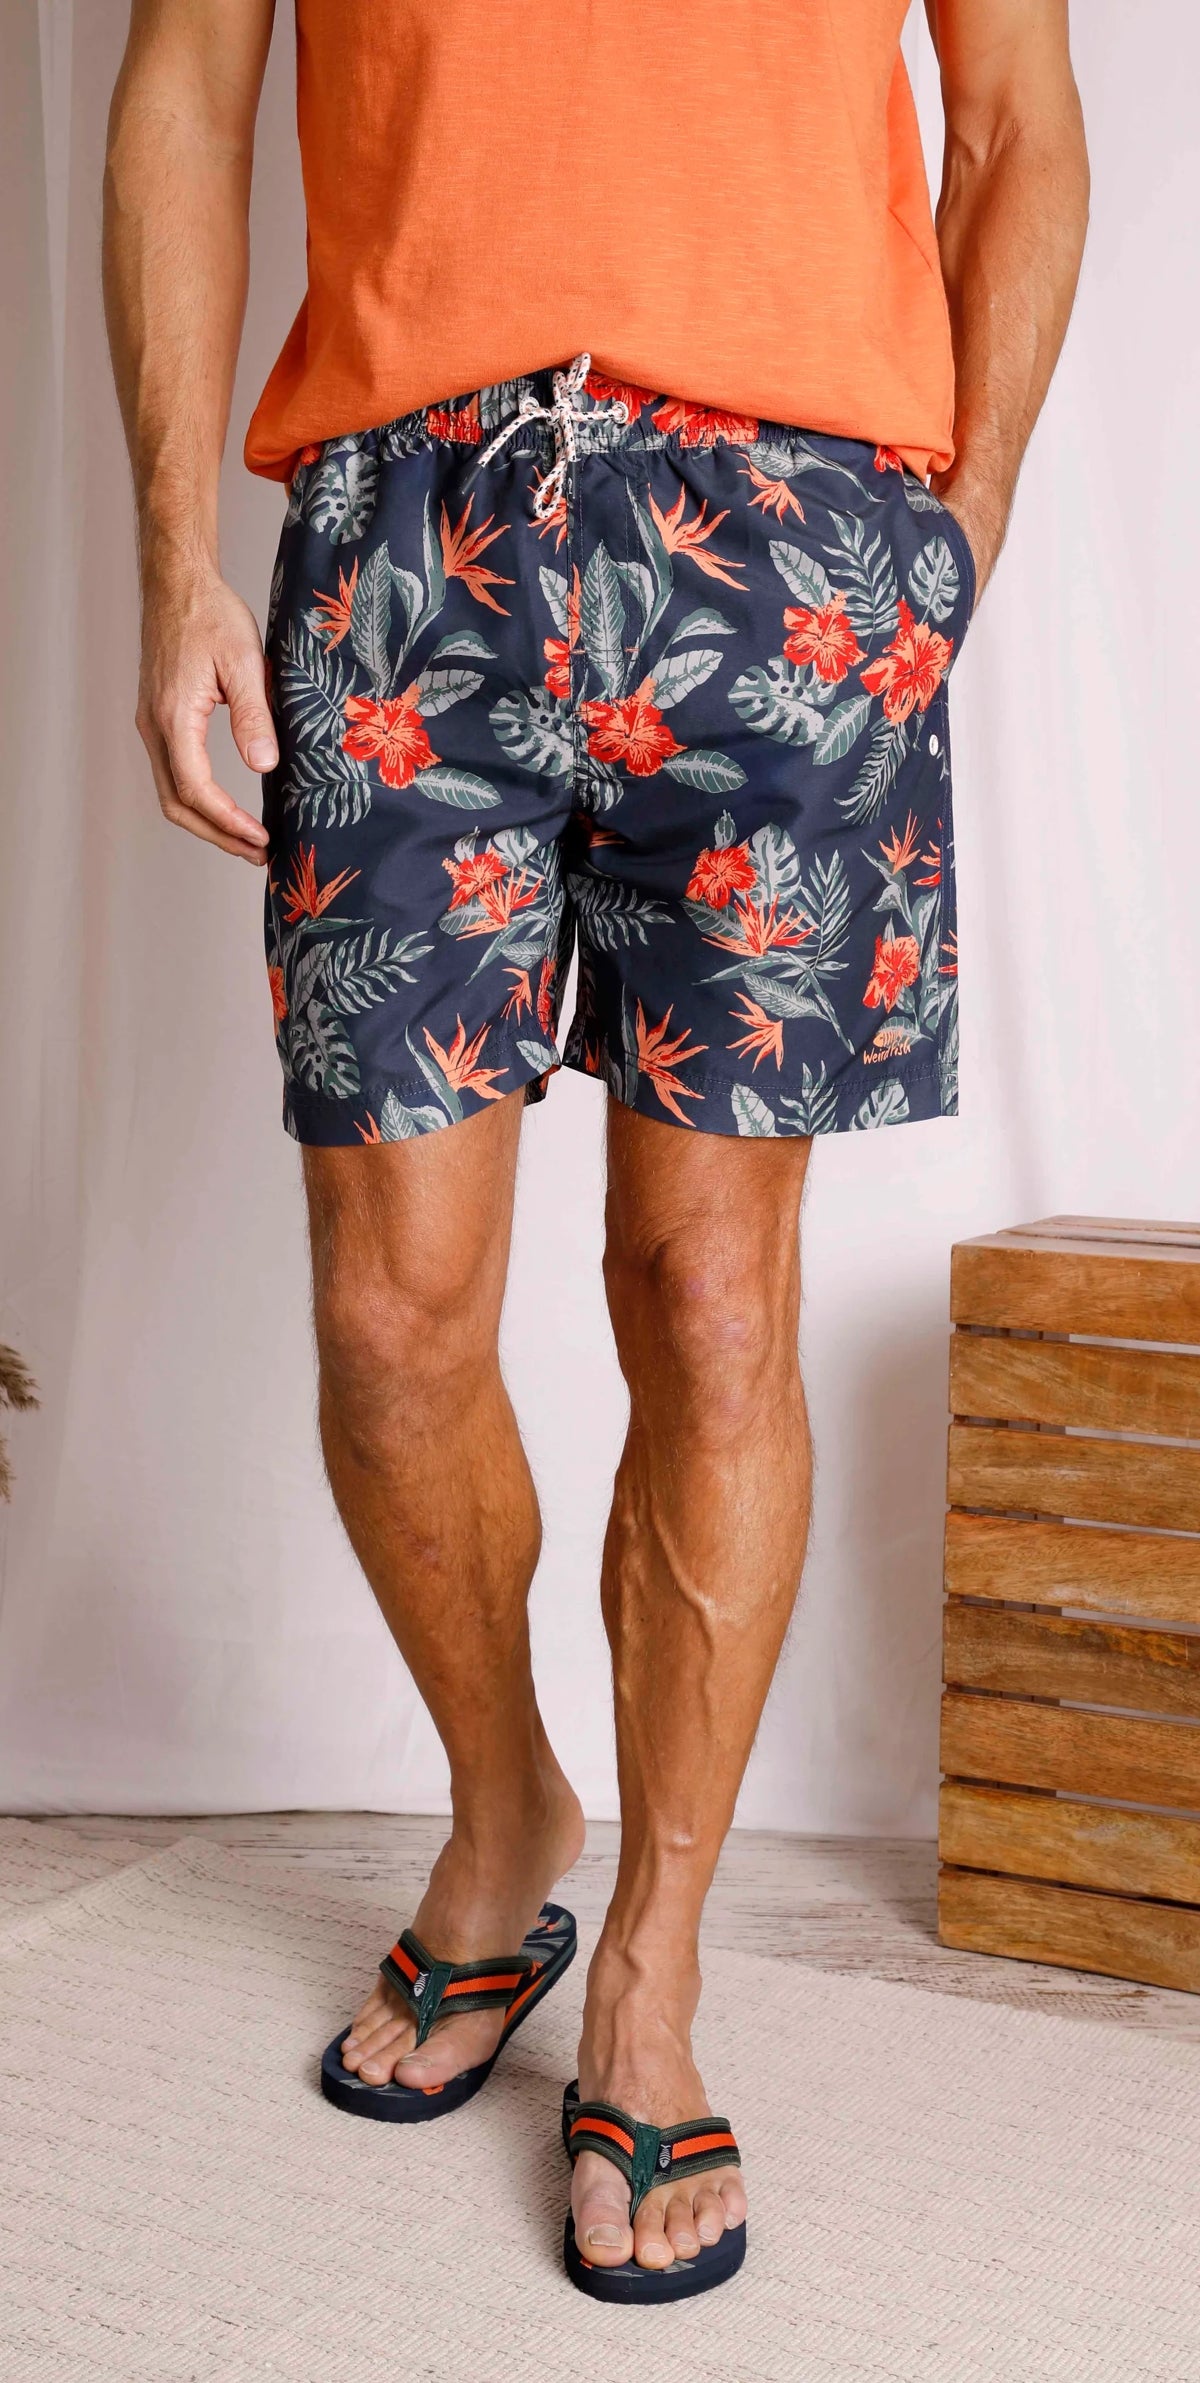 Men's Belukha tropical floral printed swimshorts from Weird Fish in Navy.